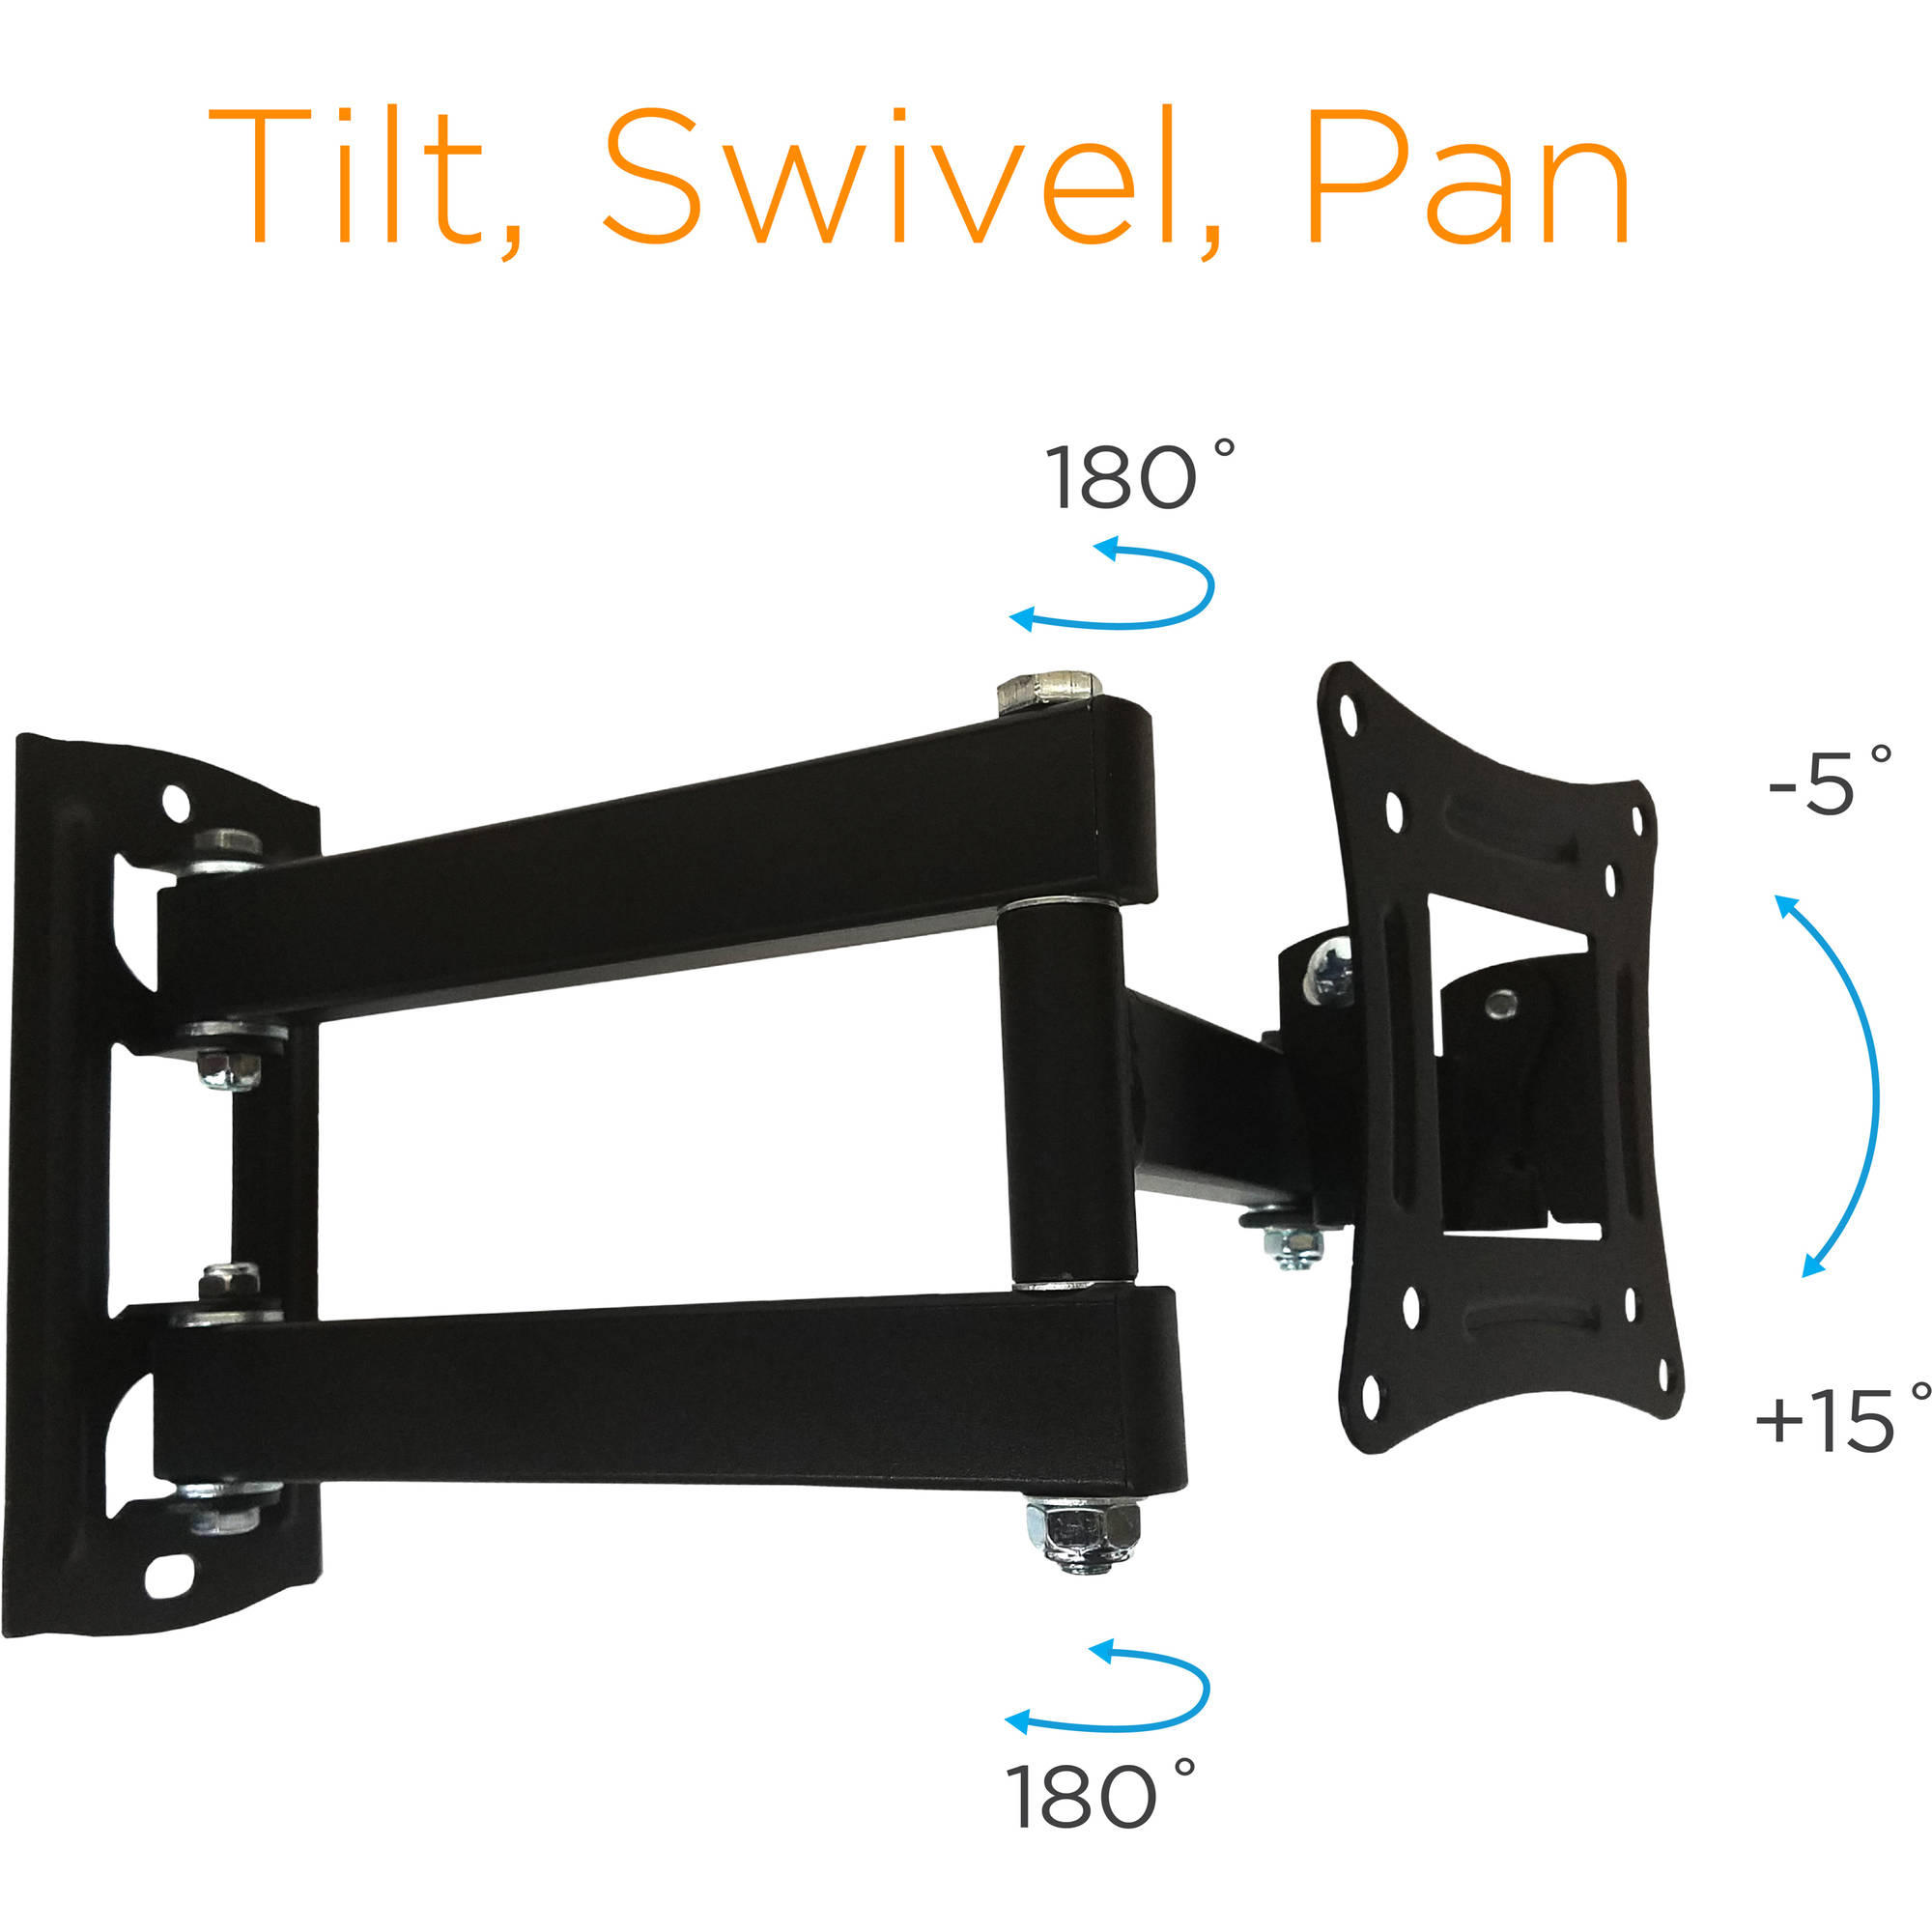 Ematic TV Wall Mount Kit for 10"-27" TVs up to 44 Pounds with HDMI Cable EMW2301 - image 3 of 6